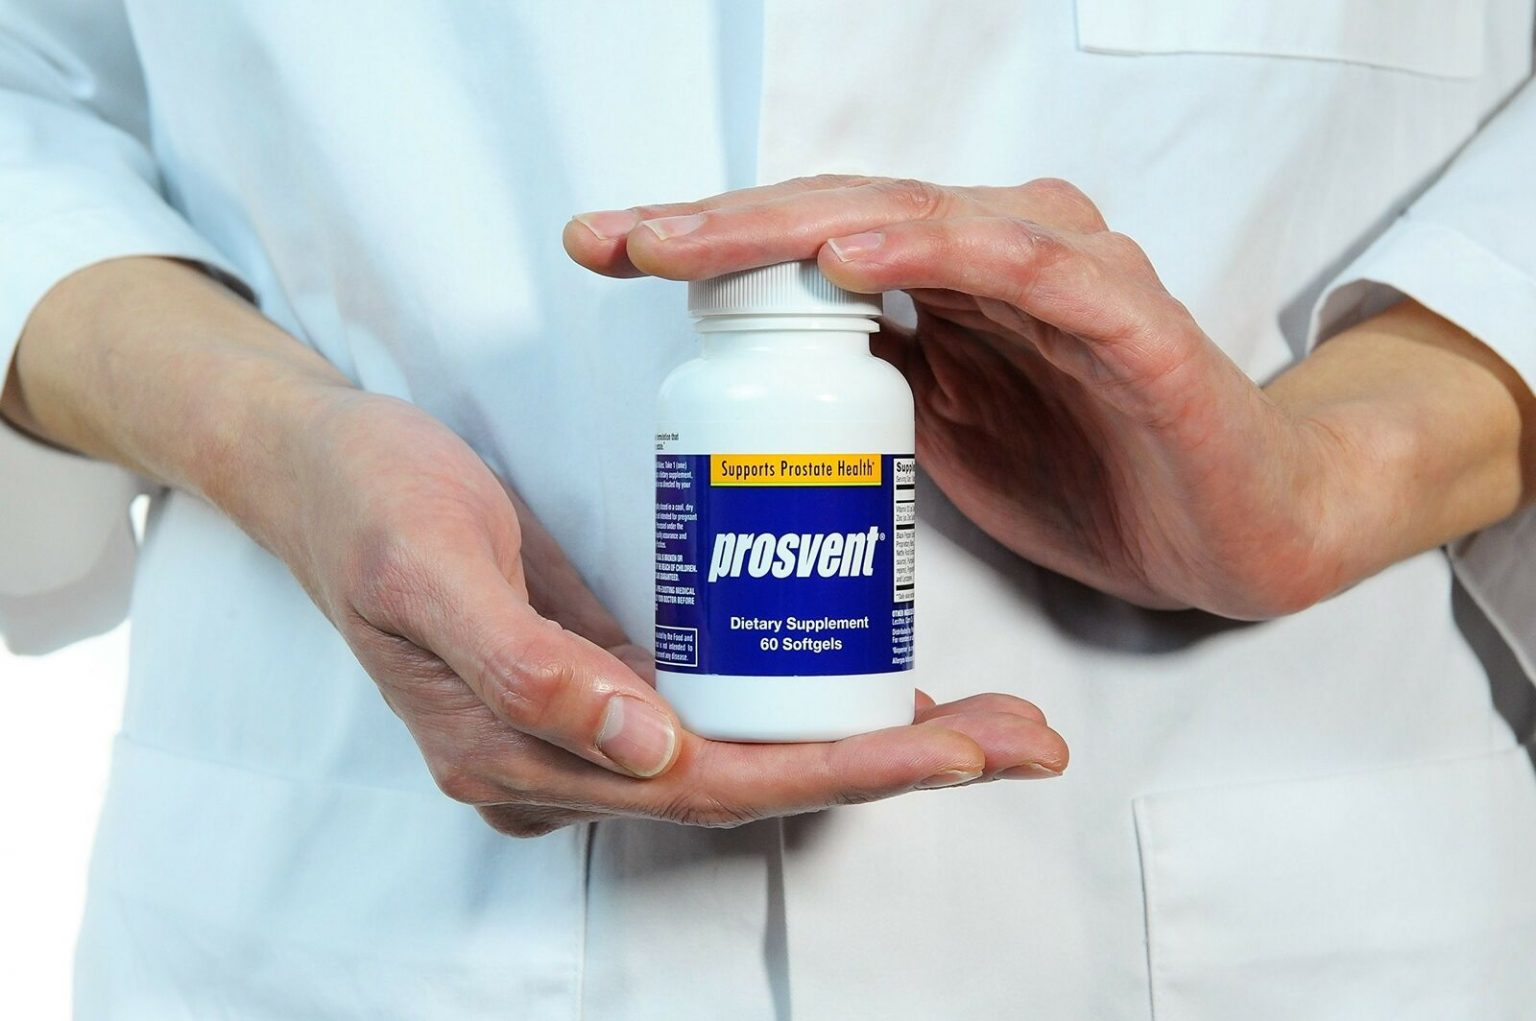 PROSVENT-Natural Prostate Health Supplement -Clinically Tested Ingredients-...